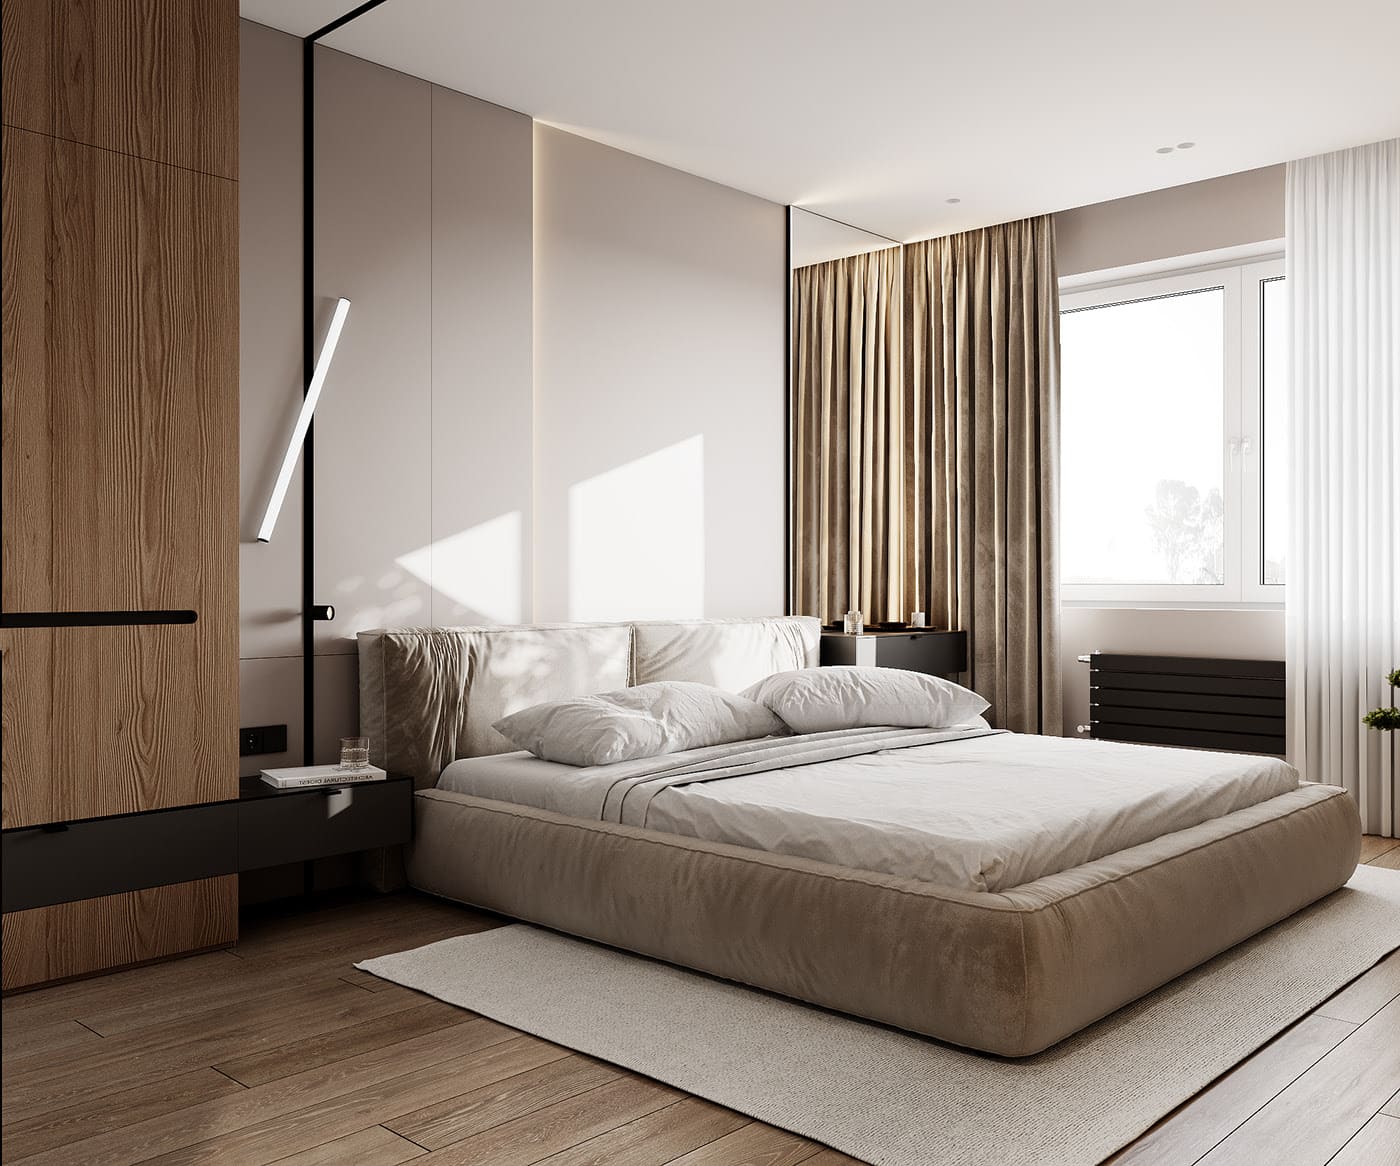 Laconic apartment in the style of minimalism, bedroom, photo 24